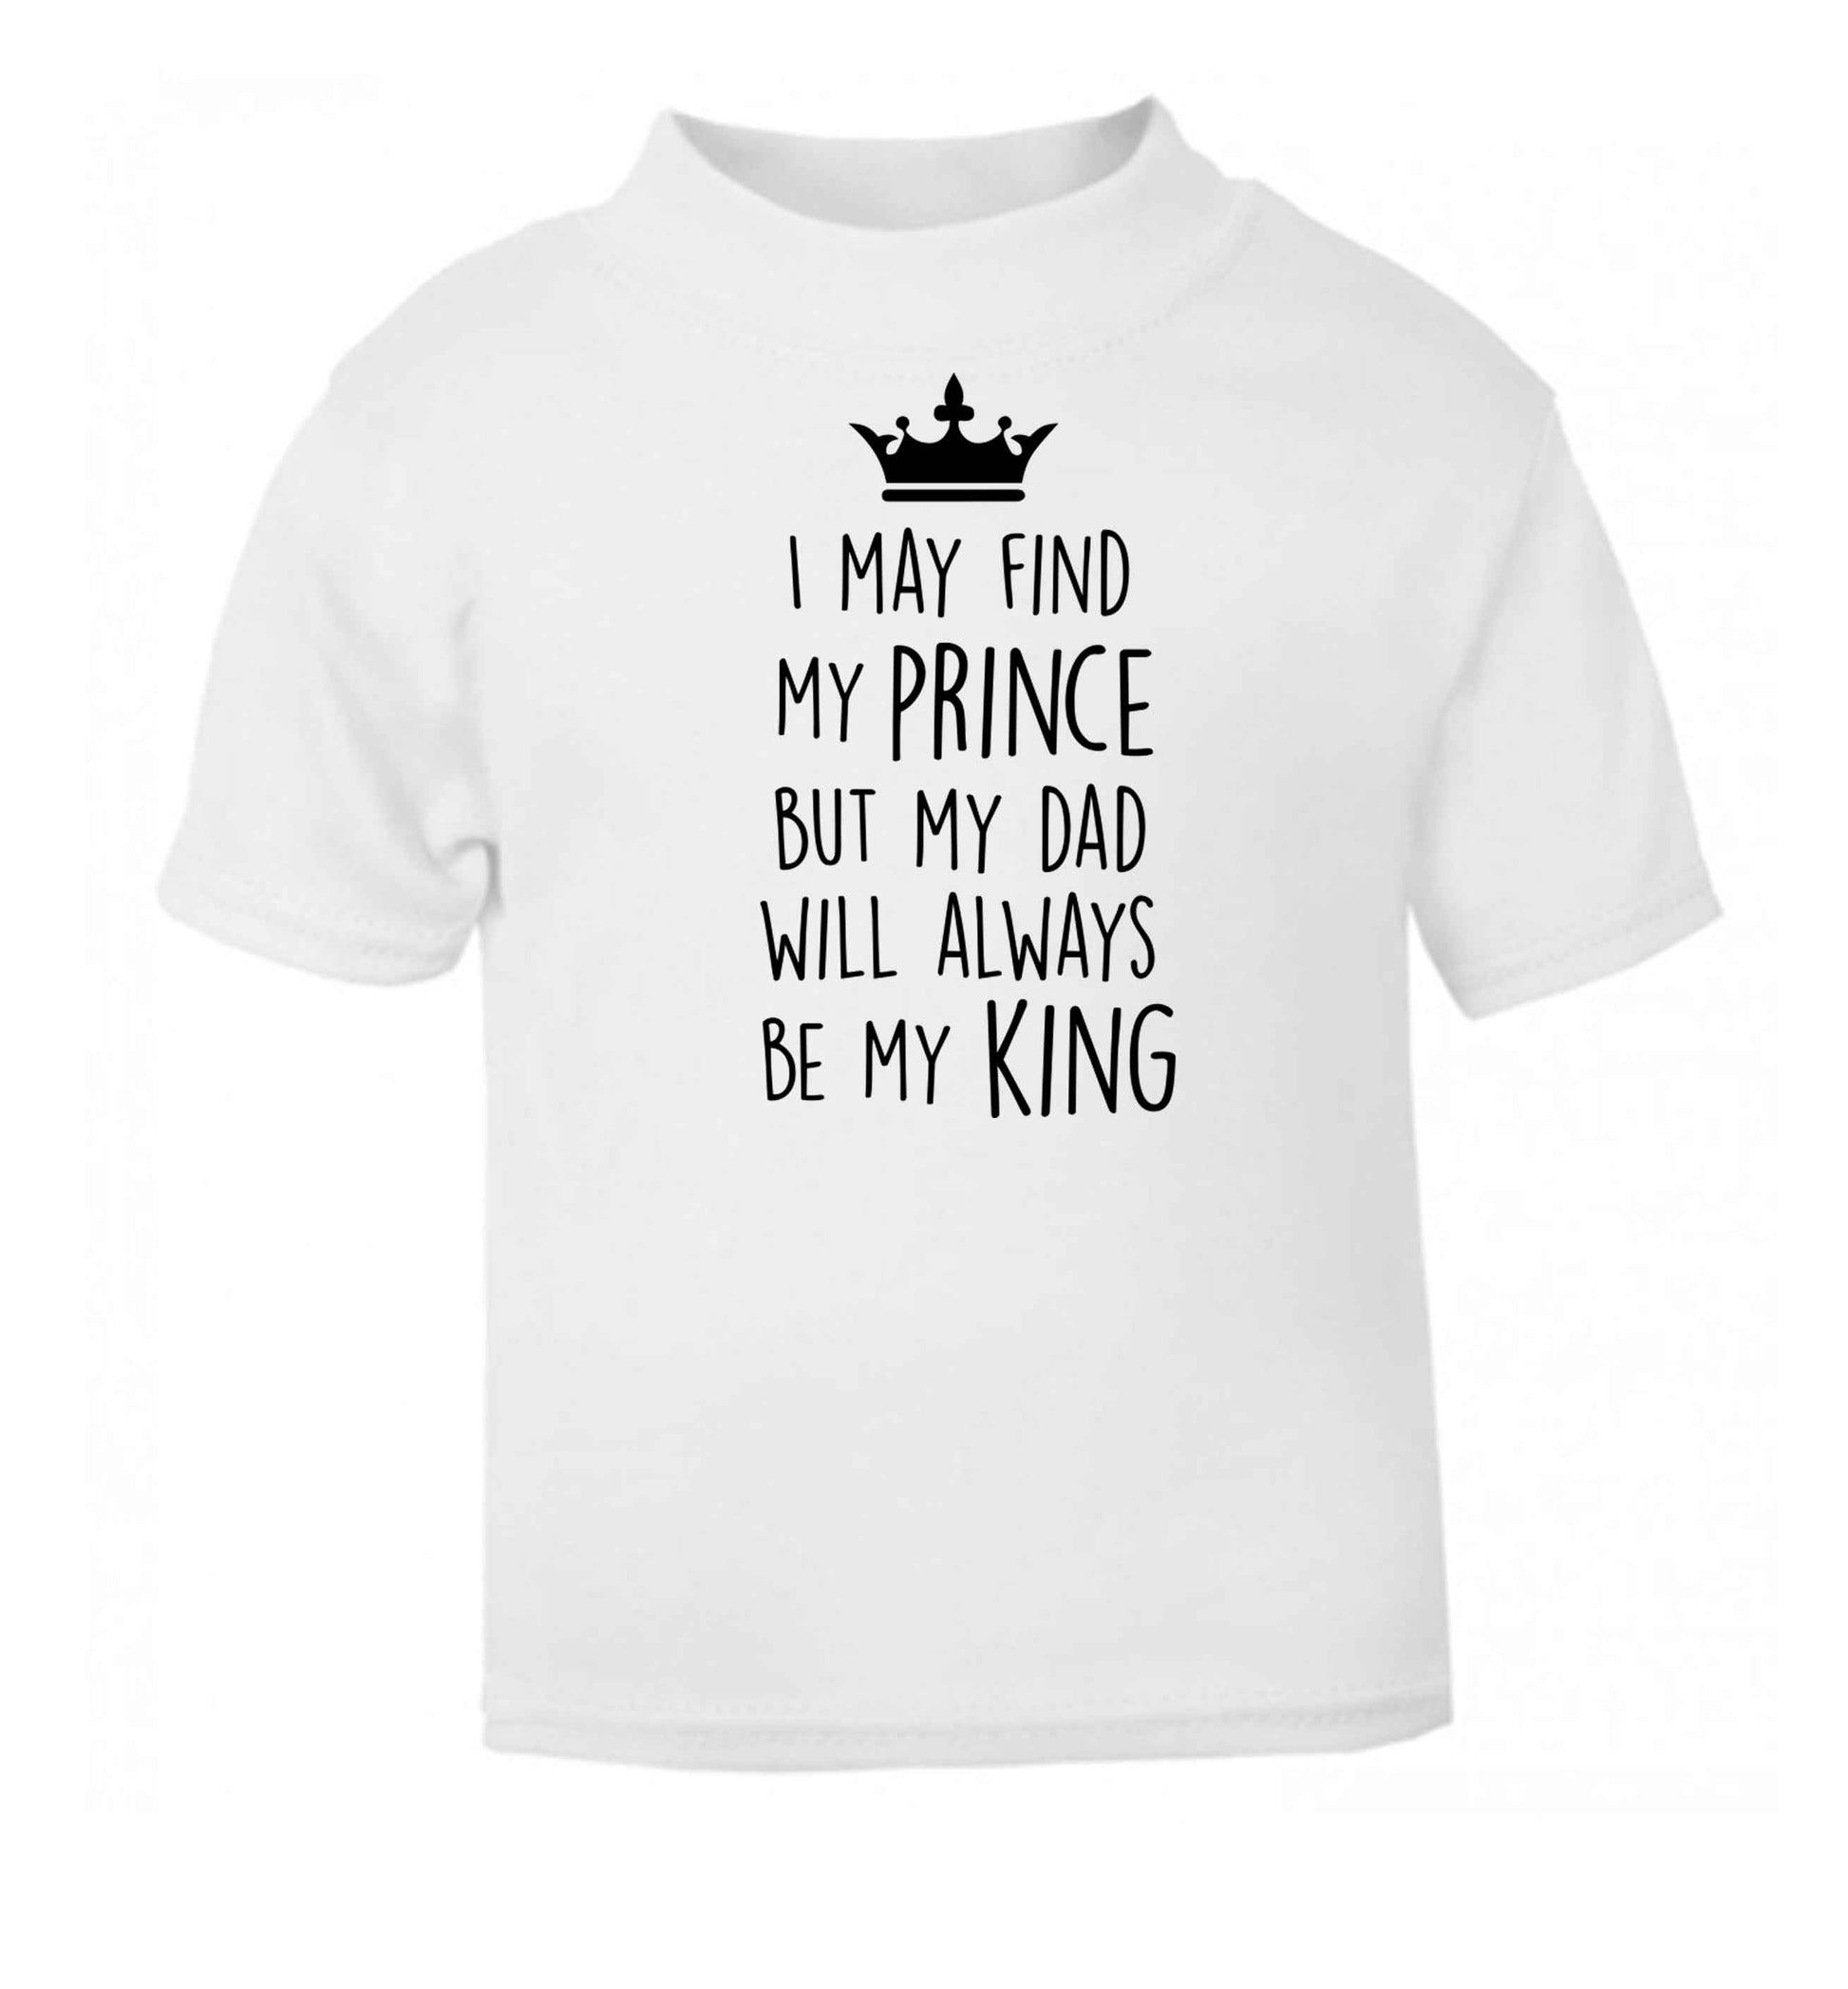 I may find my prince but my dad will always be my king white baby toddler Tshirt 2 Years